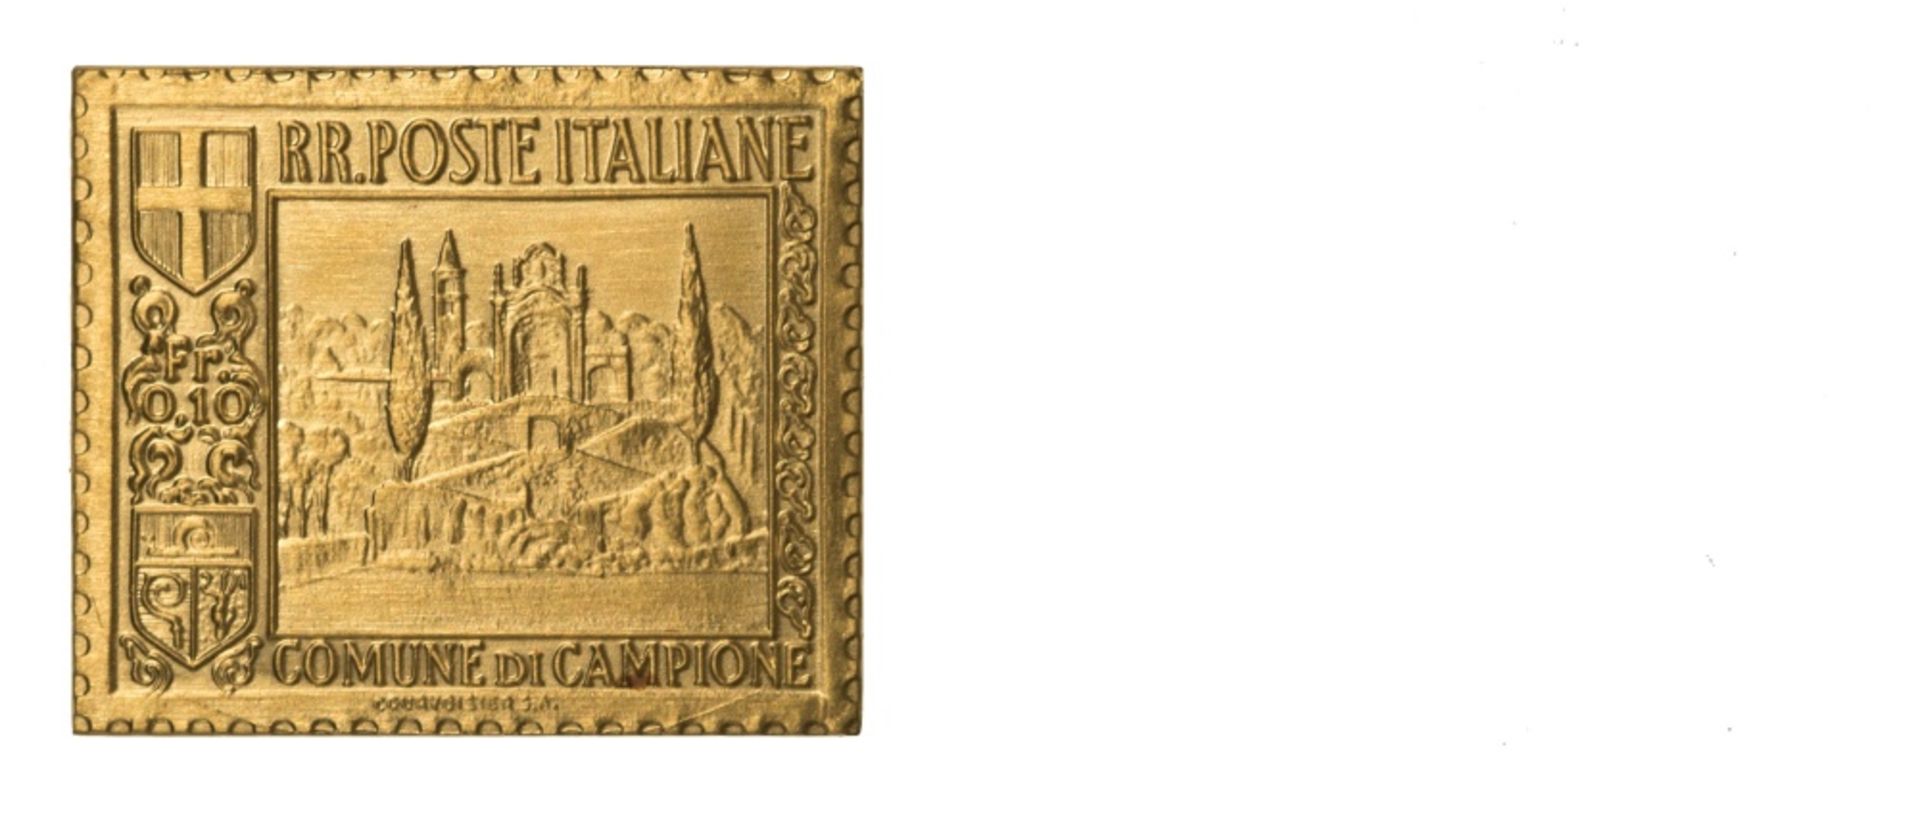 Italy Courvoisier S.A., metallic stamp, 0,10 Fr., 13.22g, 27mm x 33mm, in gold, R.R. POSTE - Image 2 of 3